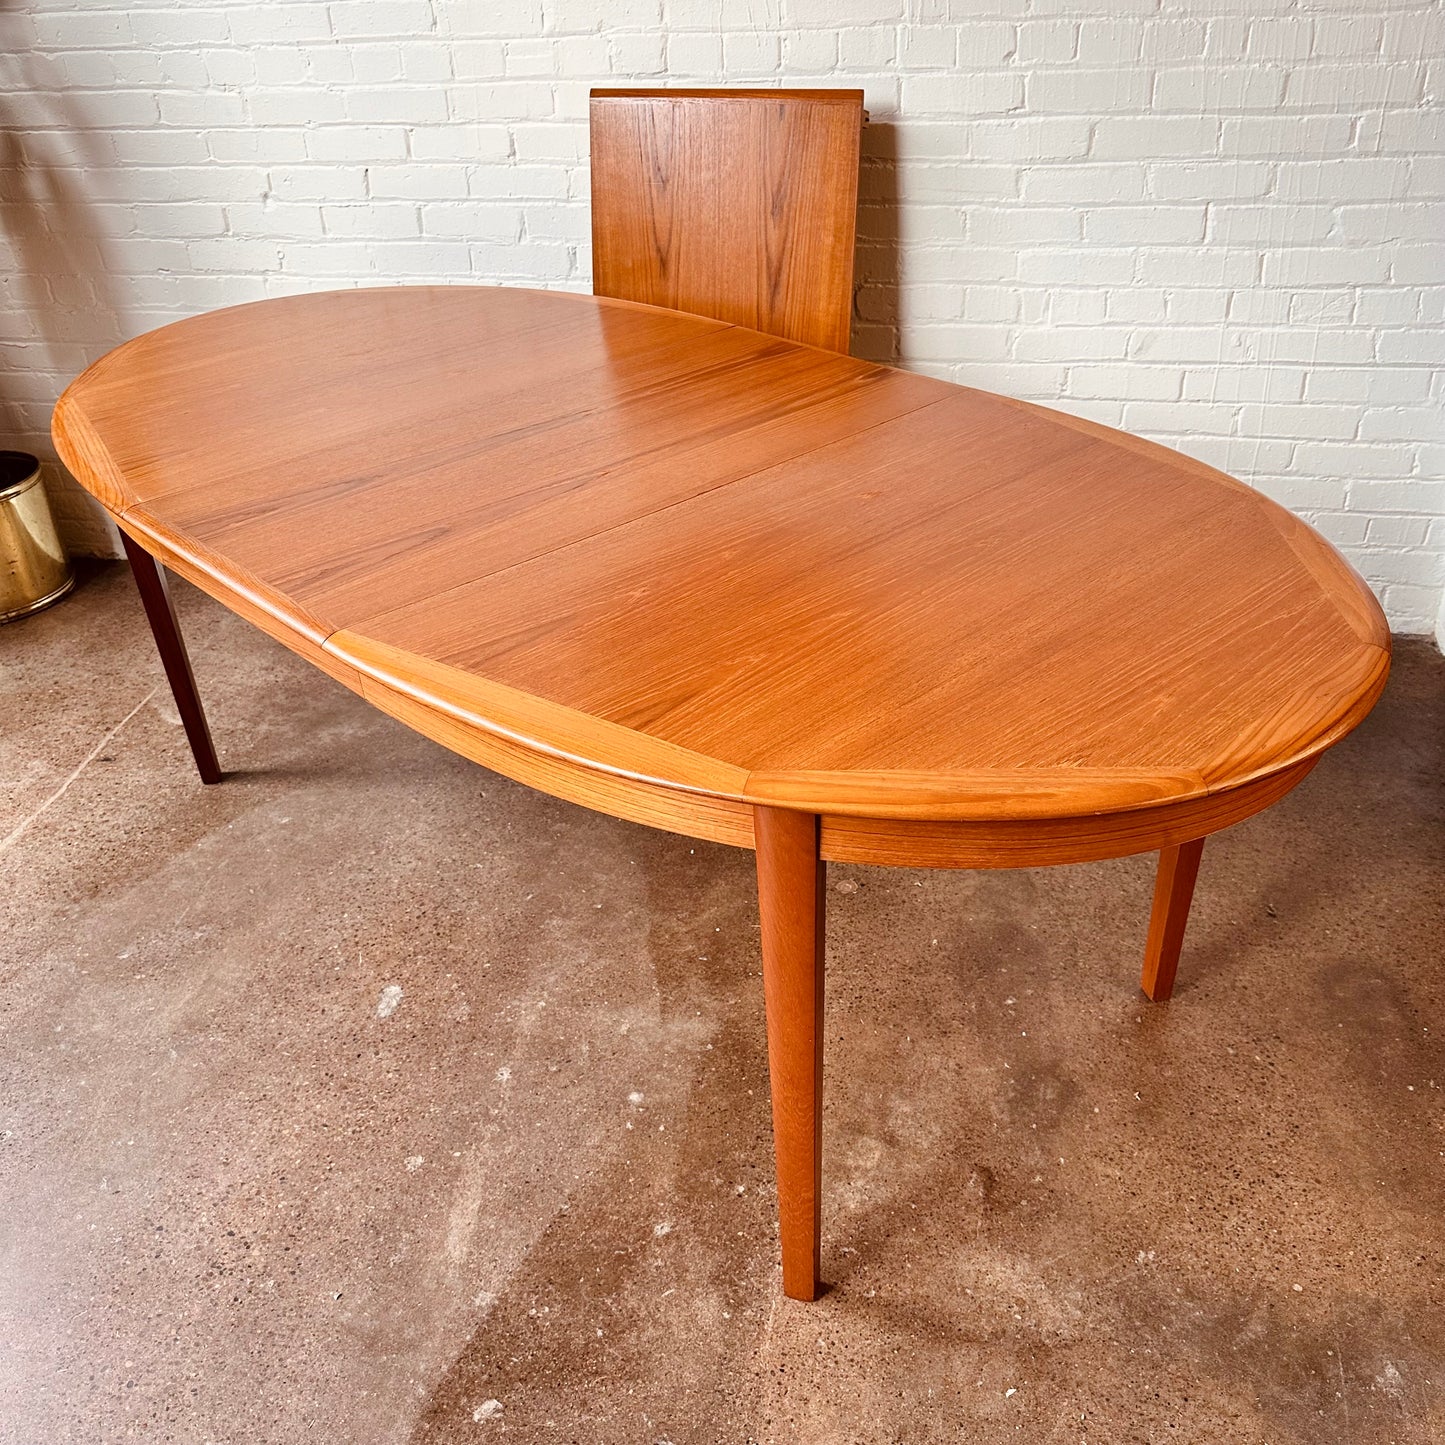 DANISH MODERN OVAL DINING TABLE WITH TWO LEAVES